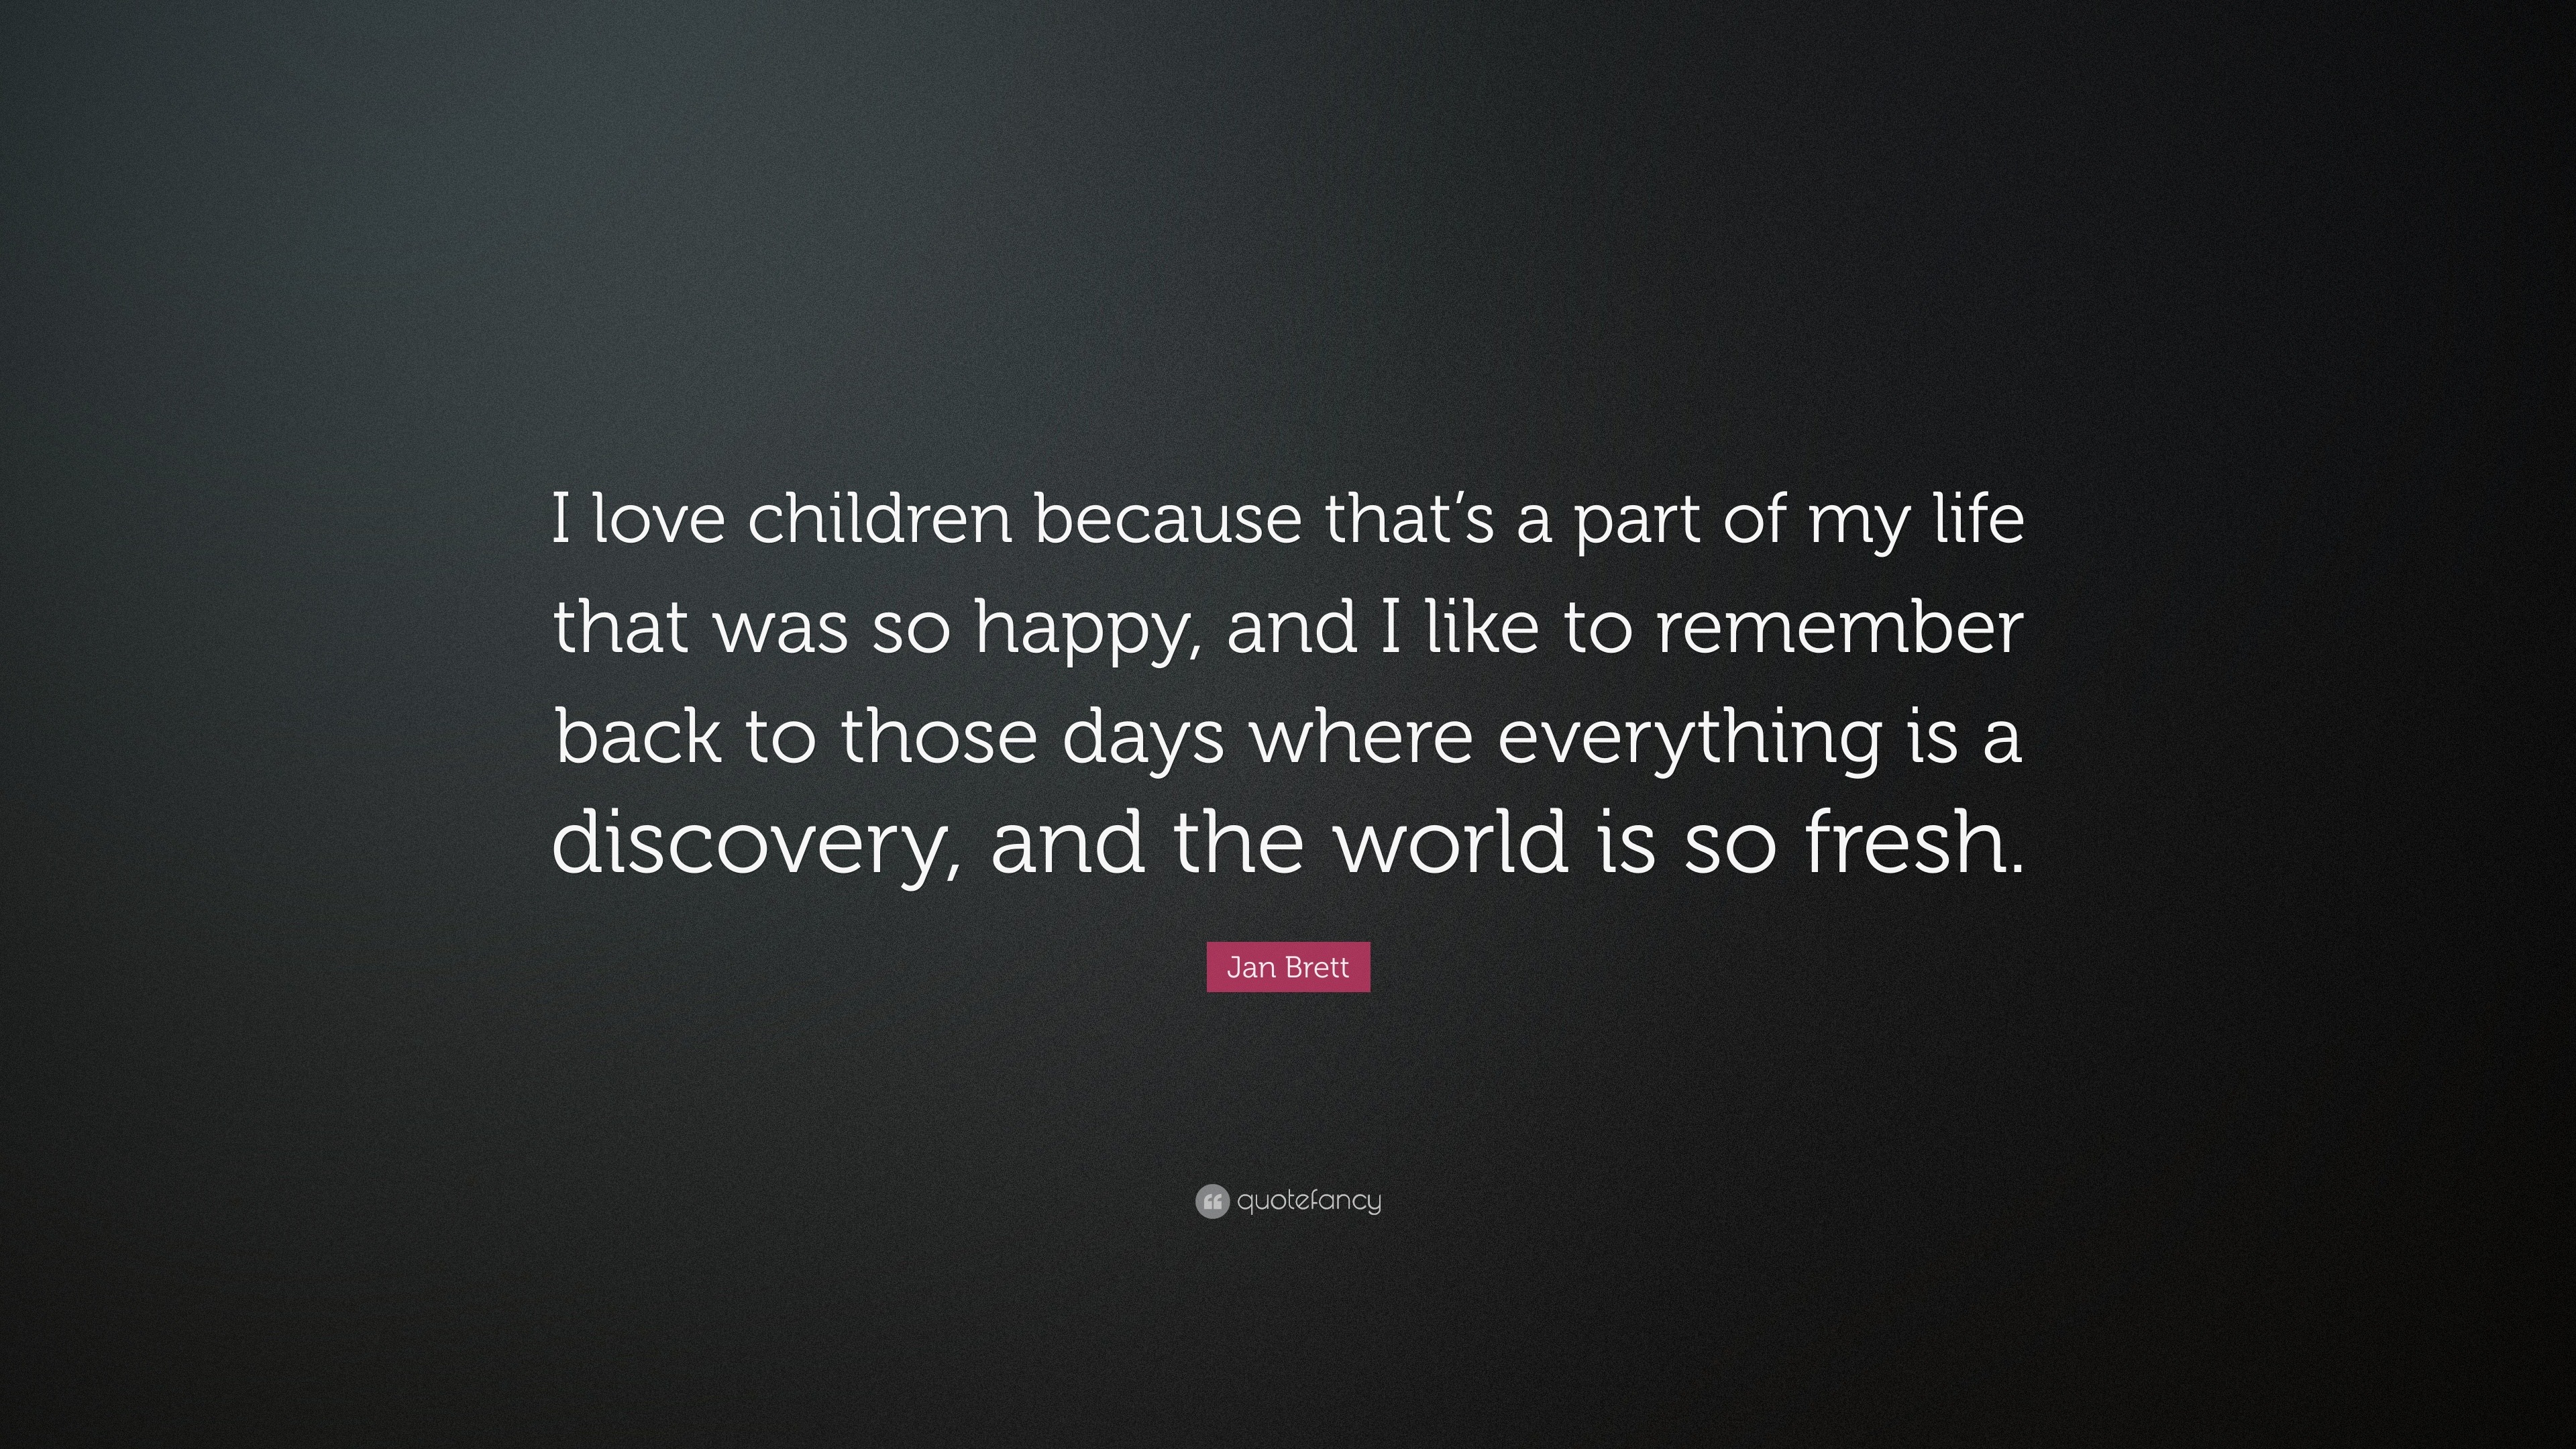 Jan Brett Quote “I love children because that s a part of my life that